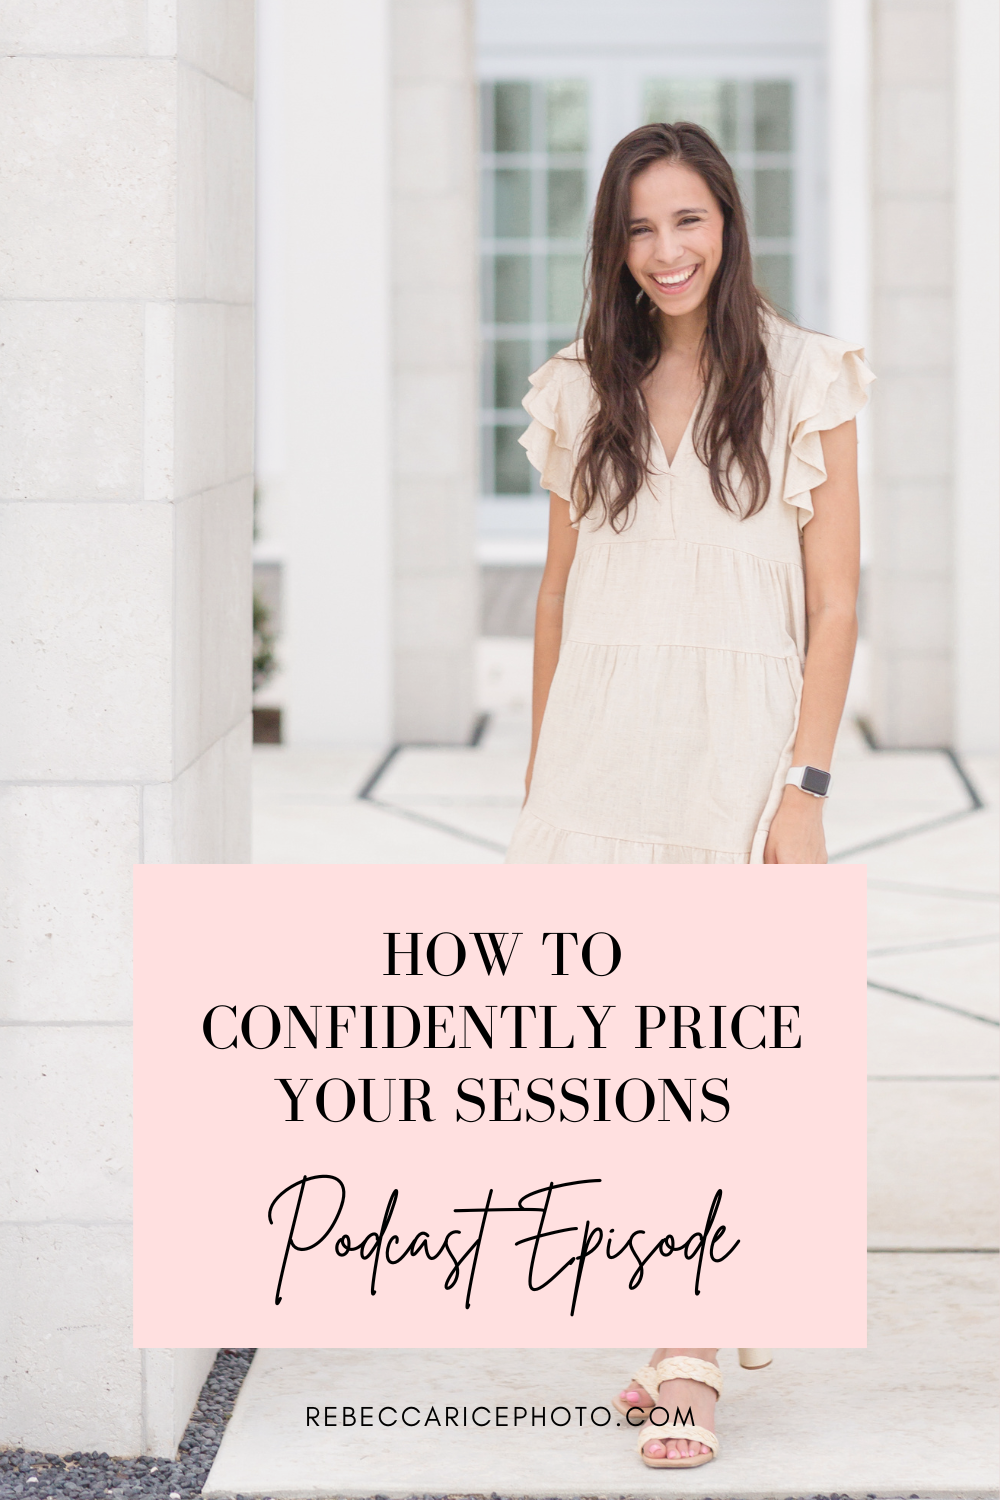 Ep 94 - How to Confidently Price Your Sessions - photography pricing tips